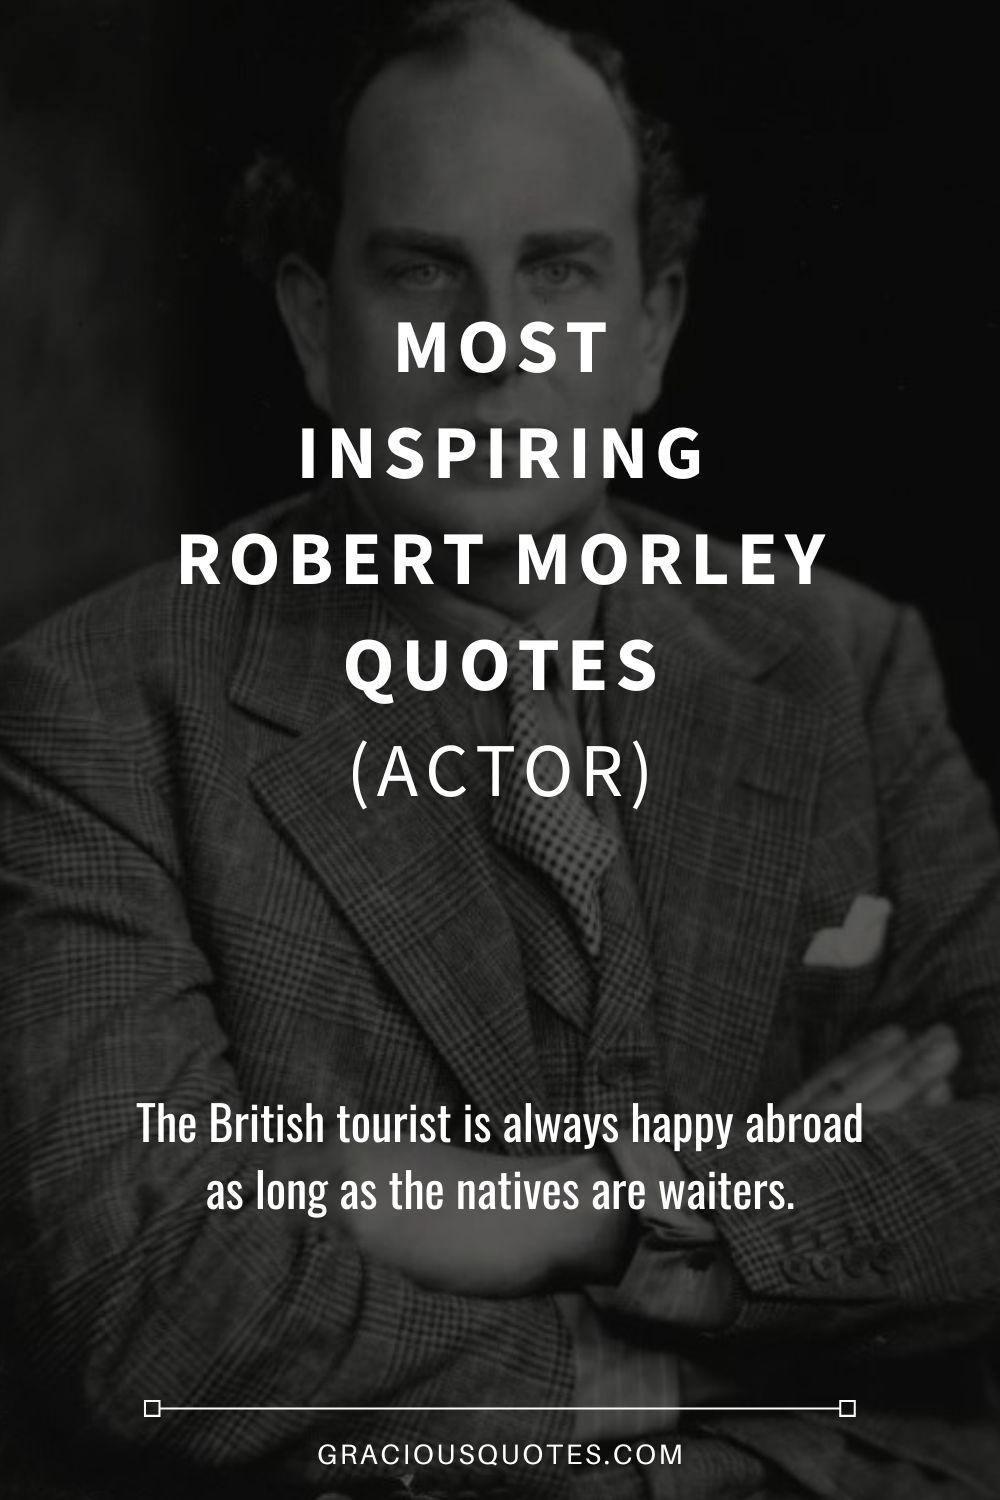 Most Inspiring Robert Morley Quotes (ACTOR) - Gracious Quotes